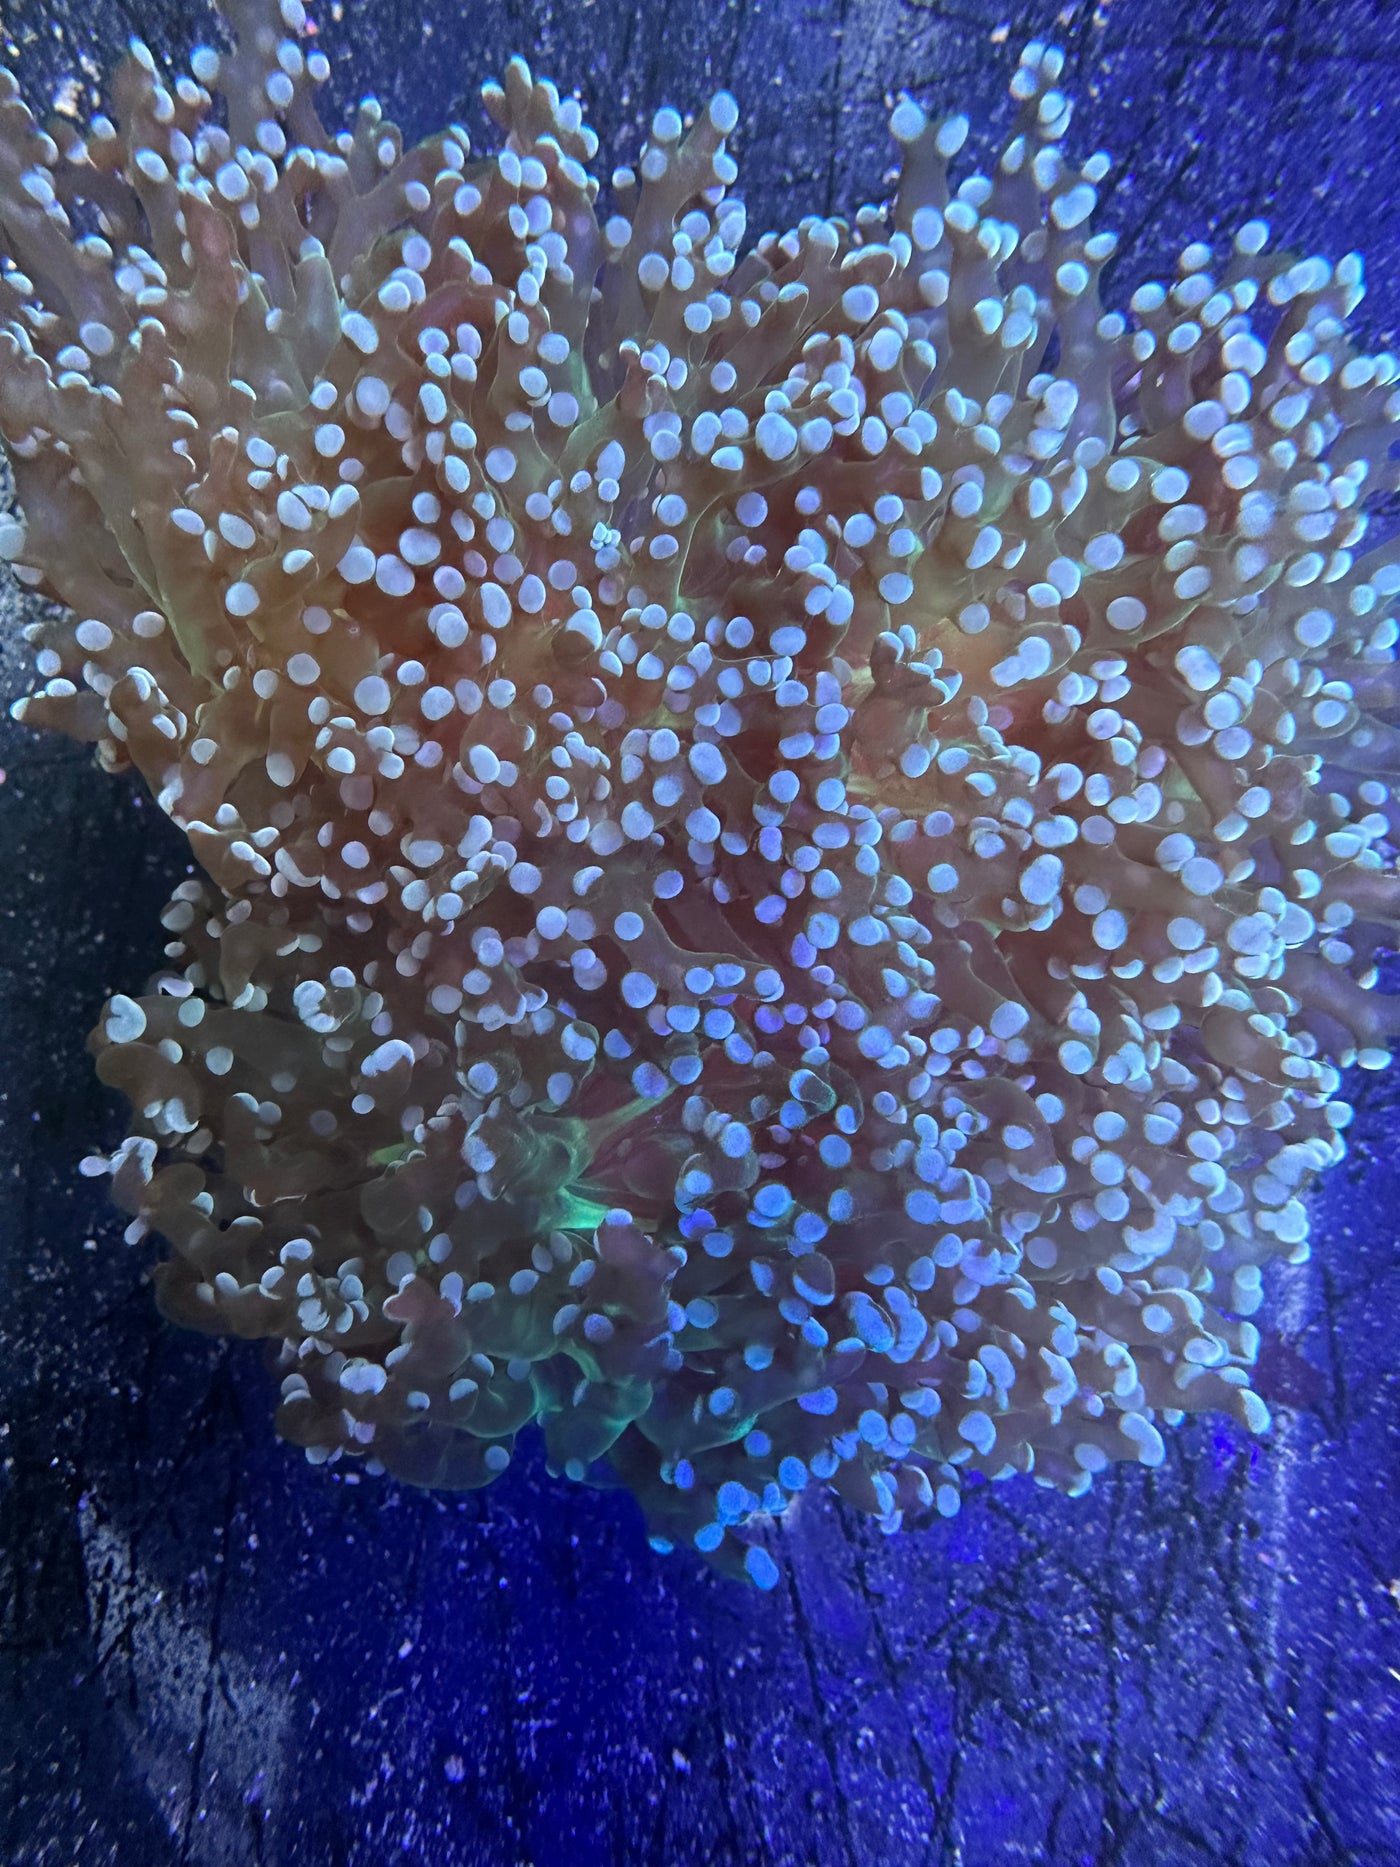 Green Frogspawn Coral